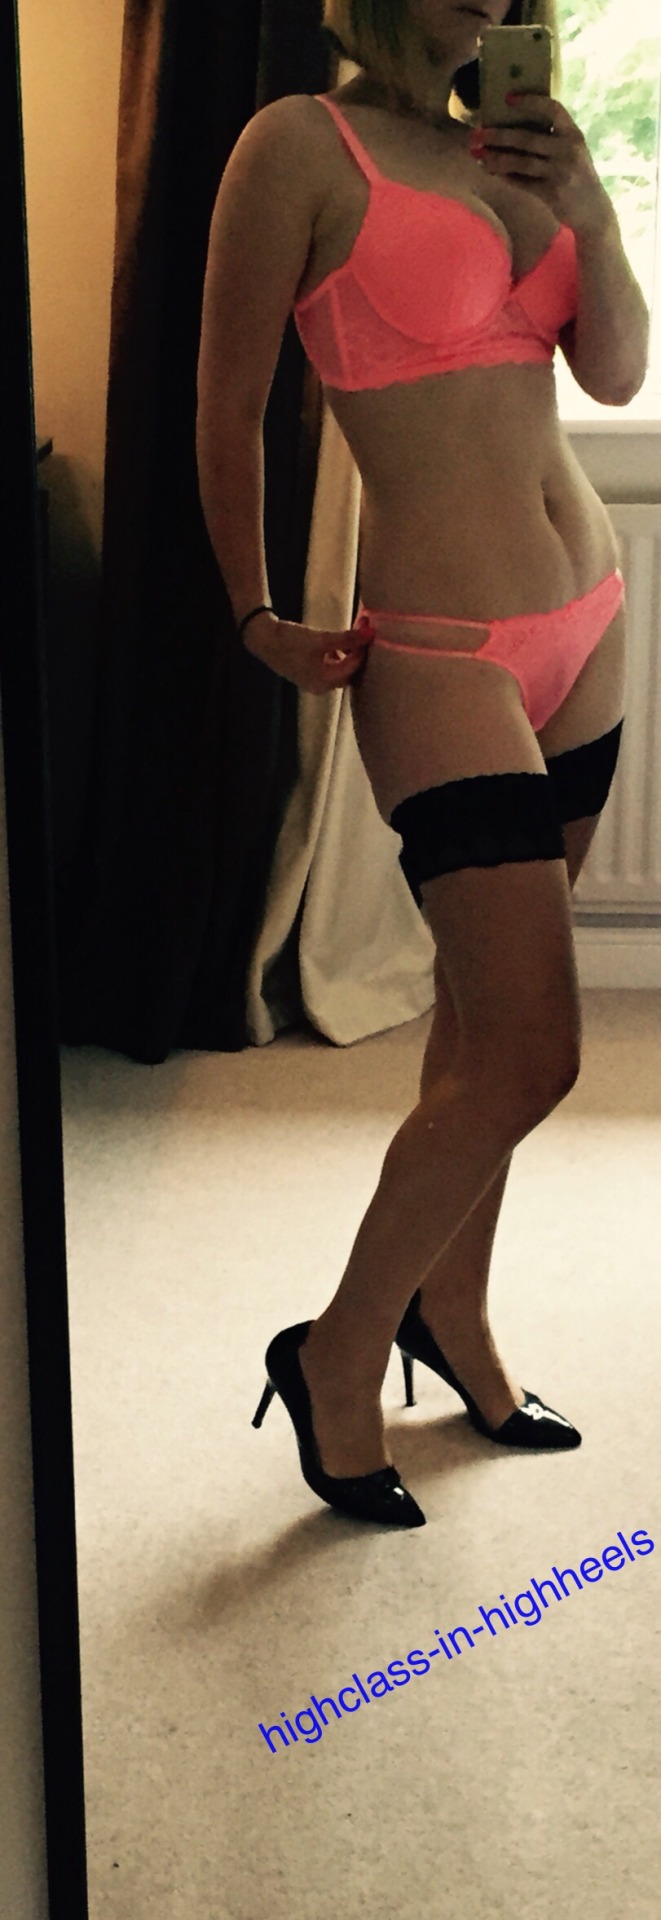 highclass-in-highheels:  Yesterday’s lingerie and workwear  Snapchat and kik: MostlyamateursMostlyamateurs@yahoo.com